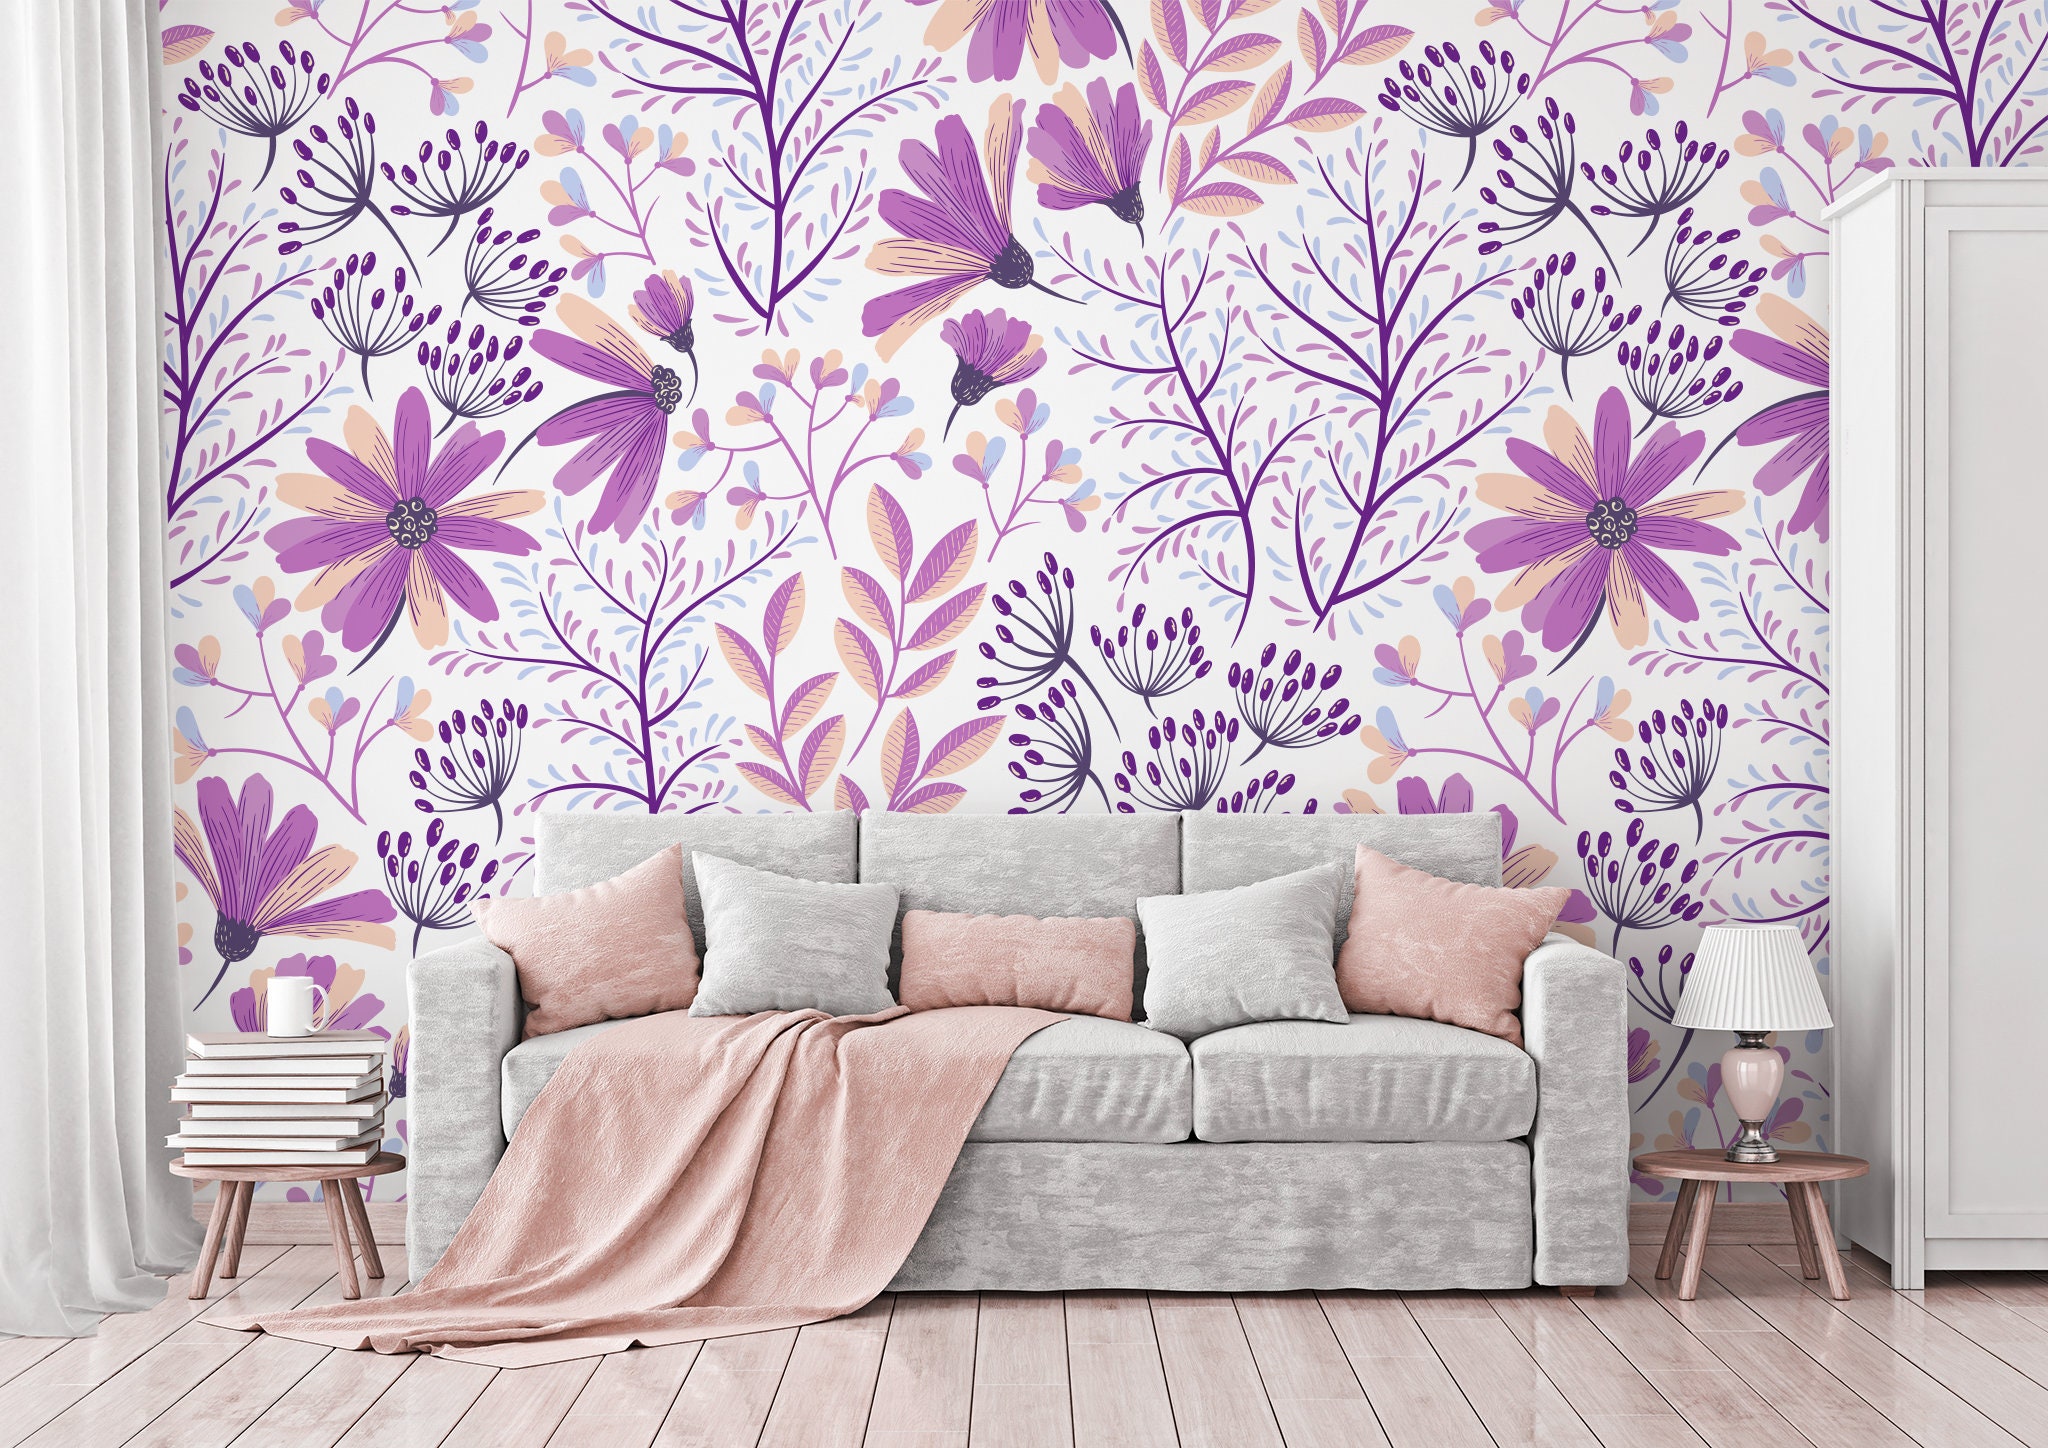 Buy Peony Flower Mural Wallpaper Mixed Lavender Purple Online in India   Etsy